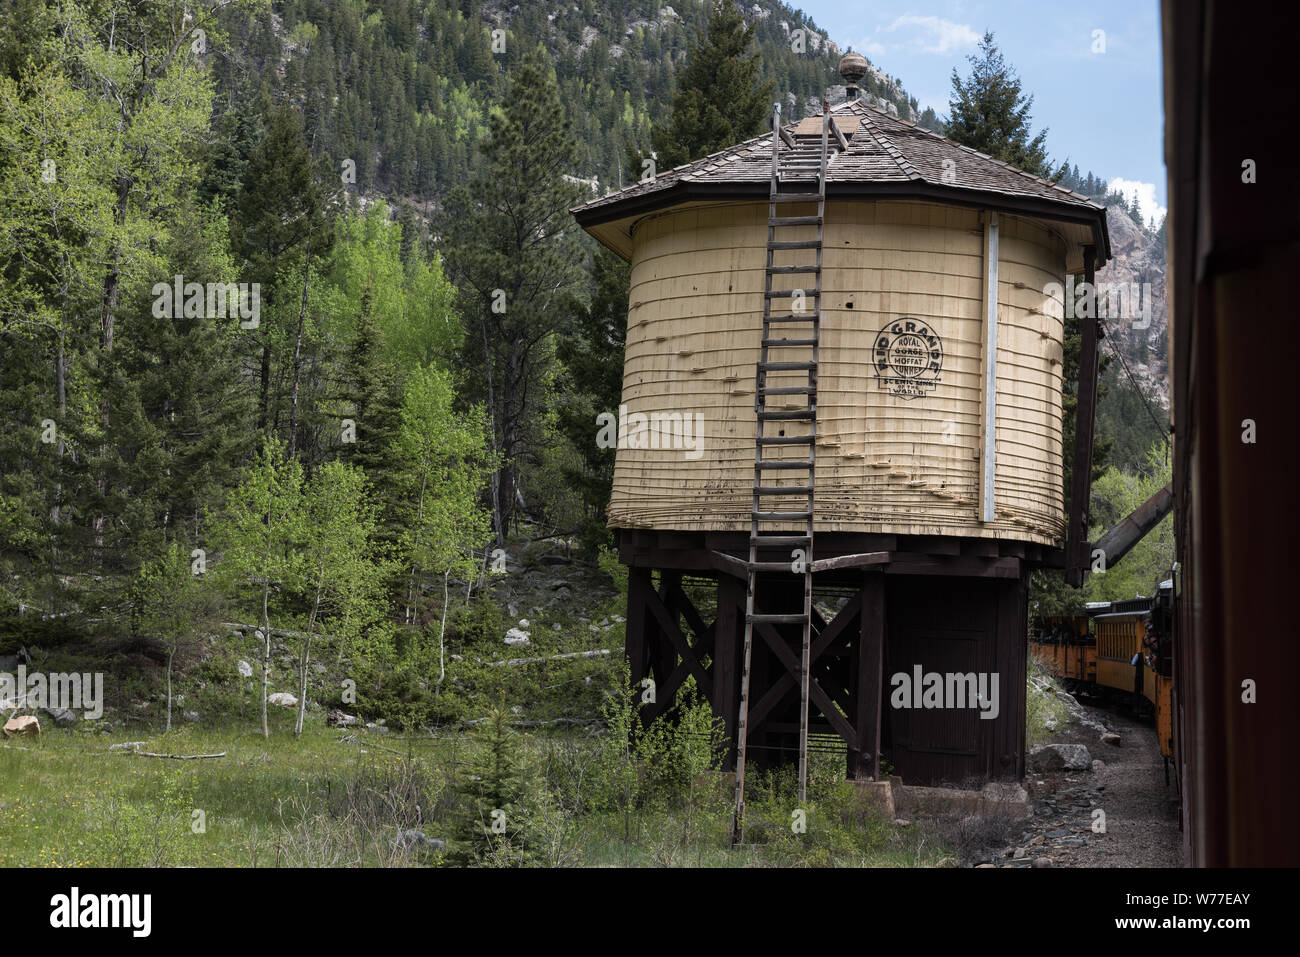 A  water tank along the route of the Durango & Silverton Narrow Gauge Railroad (D&SNG) in San Juan County, Colorado Physical description: 1 photograph : digital, tiff file, color.  Notes: The D&SNG operates 45.2 miles of track between Durango and Silverton in southwest Colorado. The route was originally opened in 1882 by the Denver & Rio Grande Railway (note that the water tank carries that line's logo) to transport silver and gold ore mined from the San Juan Mountains. The line has run continuously since 1881, and some rolling stock dates to then. It is now strictly a tourist and heritage lin Stock Photo